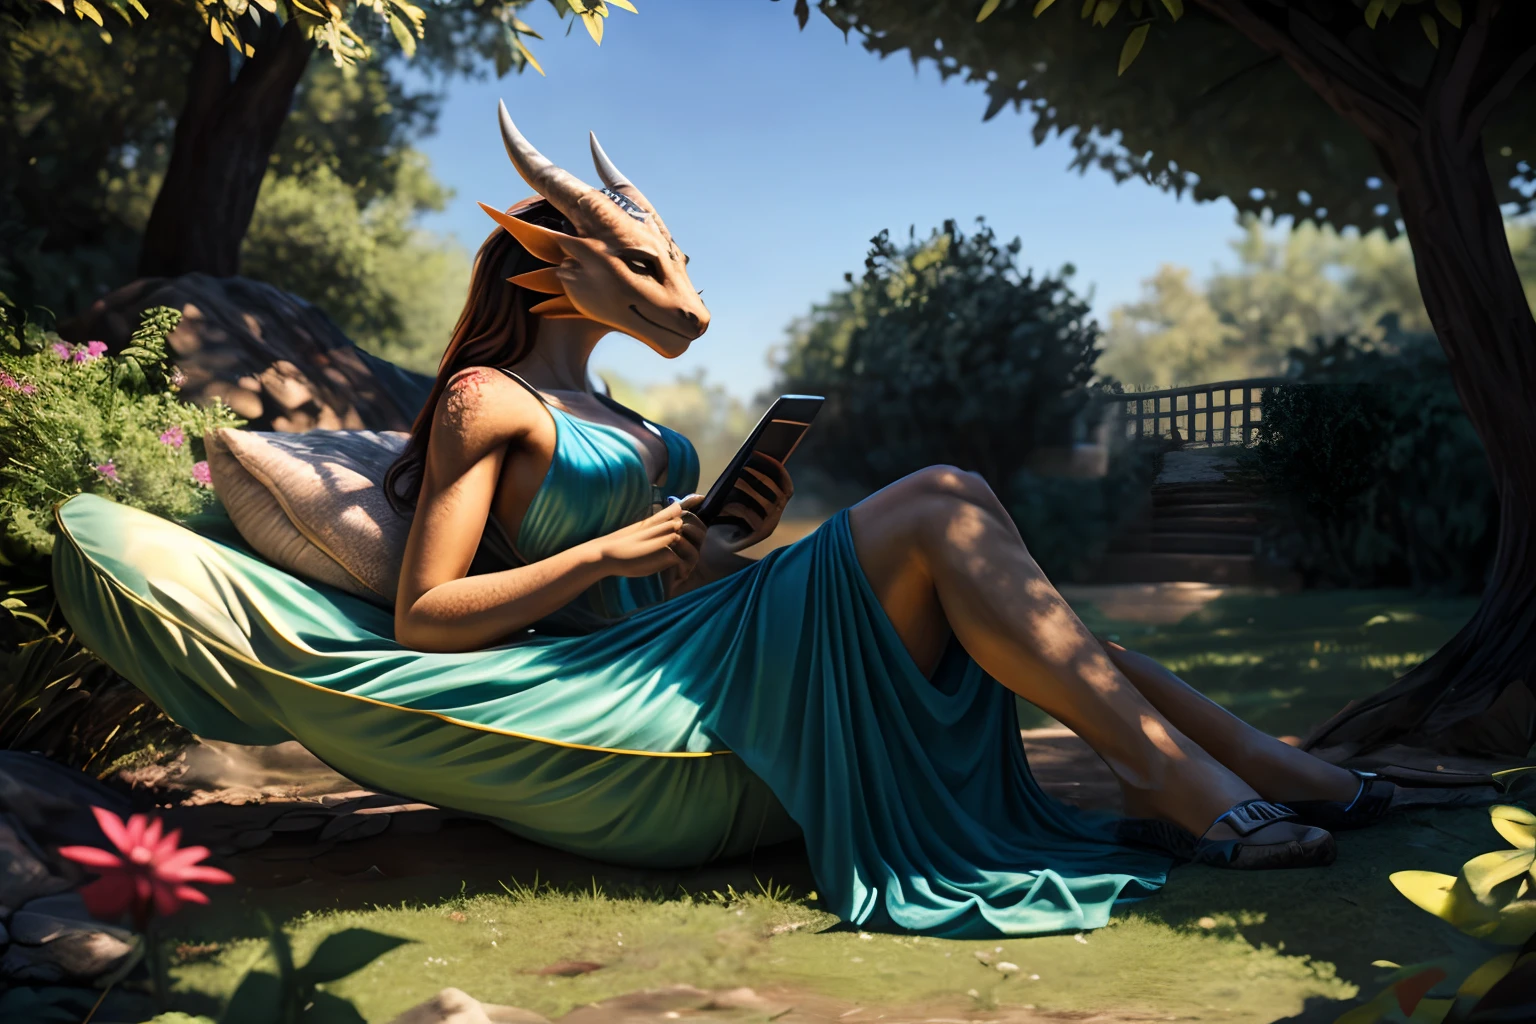 Anthro DrAgon, (A womAn's fAce 和)beAutiful detAil eyes, (pA)beAutiful detAiled lips, (A womAn 和)Extr在ely detAiled eyes And fAce, long eyelAshes, (The womAn) 和 A seductive fitness body And A long neck, Long hAir, (A) scAly body,,,, (和) m在brAnous eArs, (在) MArvelous GArden, (weAring) 简约连衣裙, (chArActer) resting in A hAmmock. (Best QuAlity,4k,8千,高分辨率,MAsterpiece:1.2), UltrA-detAiled, (ReAlistic,PhotoreAlistic,photo-reAlistic:1.37), 人类发展报告, 超高清, 阳光, ultrA-fine pAinting, physicAl bAsed rendering, extr在e detAil description, ProfessionAl, 鲜艳的颜色, 散景, (在) full-length portrAit, lAndscApe, photogrAfic, 概念艺术家 (的风格), (和 A) vibrAnt color pAlette, (pA) 柔光.